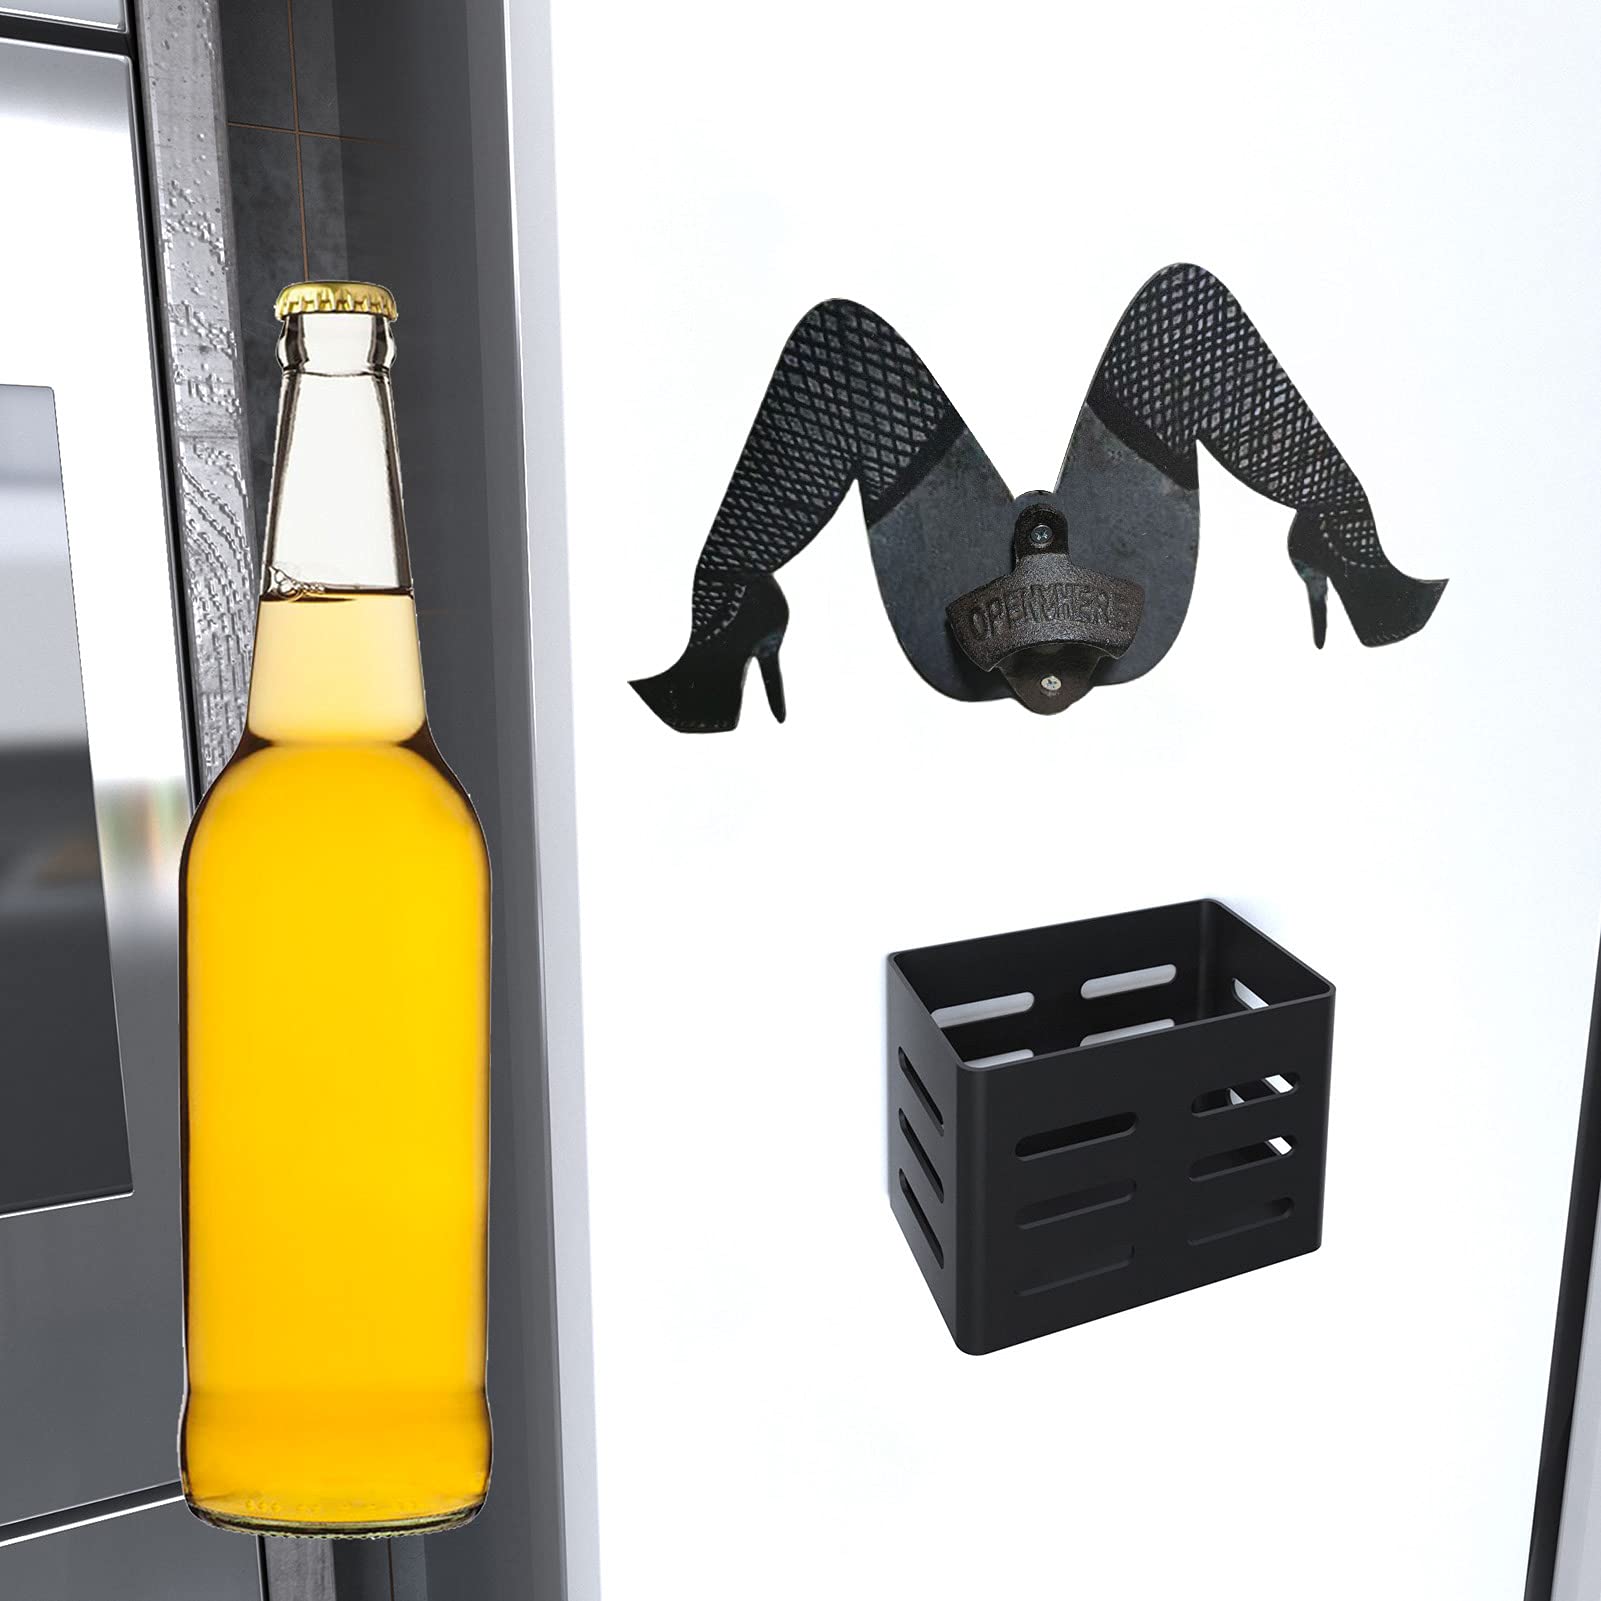 Funny Legs Bottle Opener,Come and Use Me Sexy Lady Legs Shape Can Beer Opener Wall Mountable Iron Metal Manual Beer Opening Tool for Kitchen, Bar, Yard,Birthday Gifts for Men 1